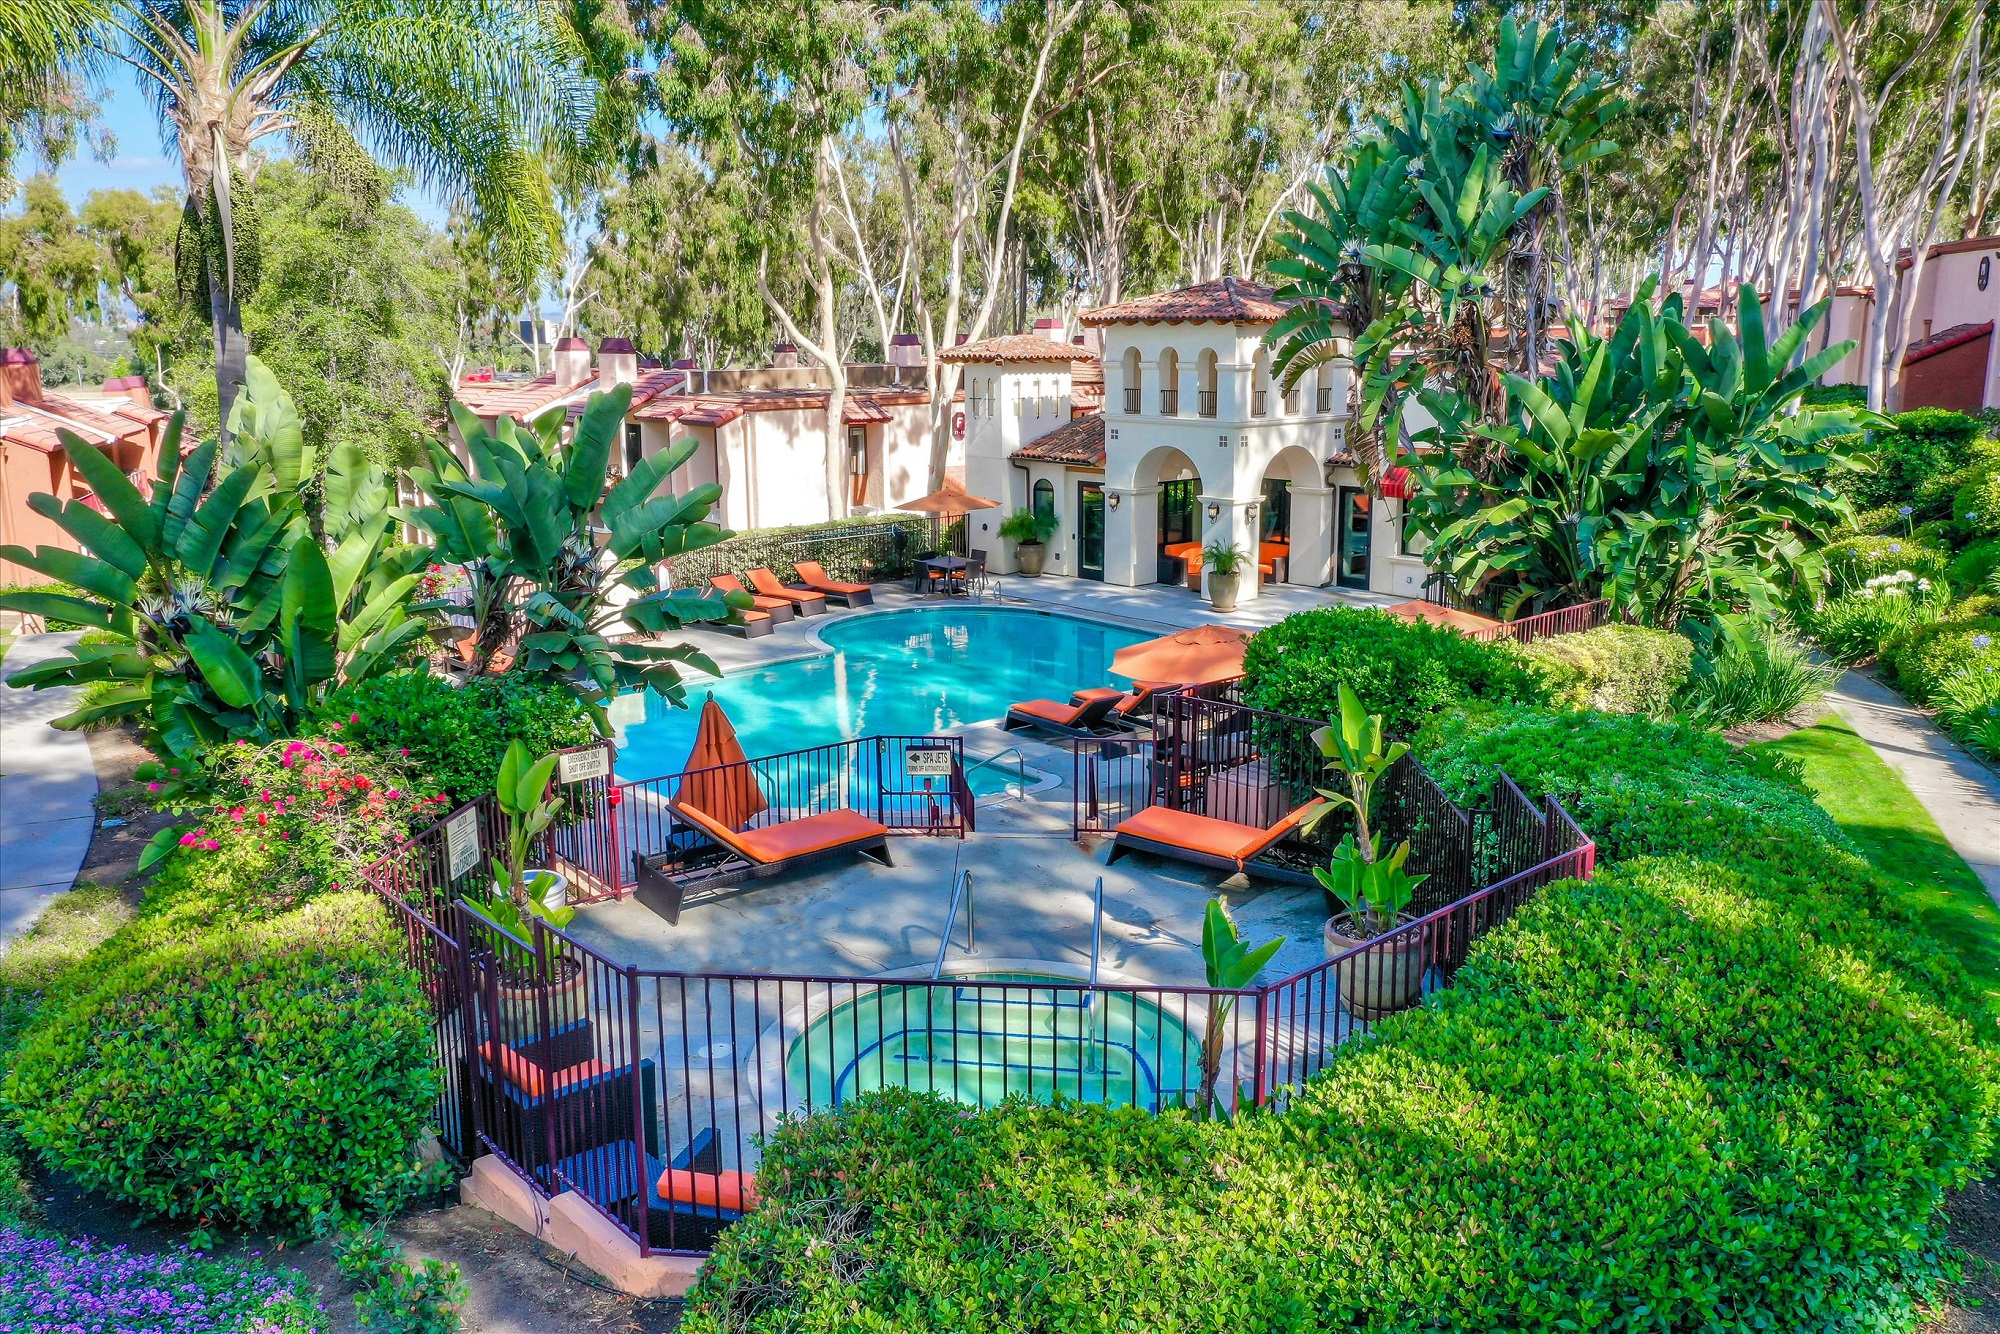 Exterior day shot of pool with tropical landscaping, shaded seating, and suntanning beds